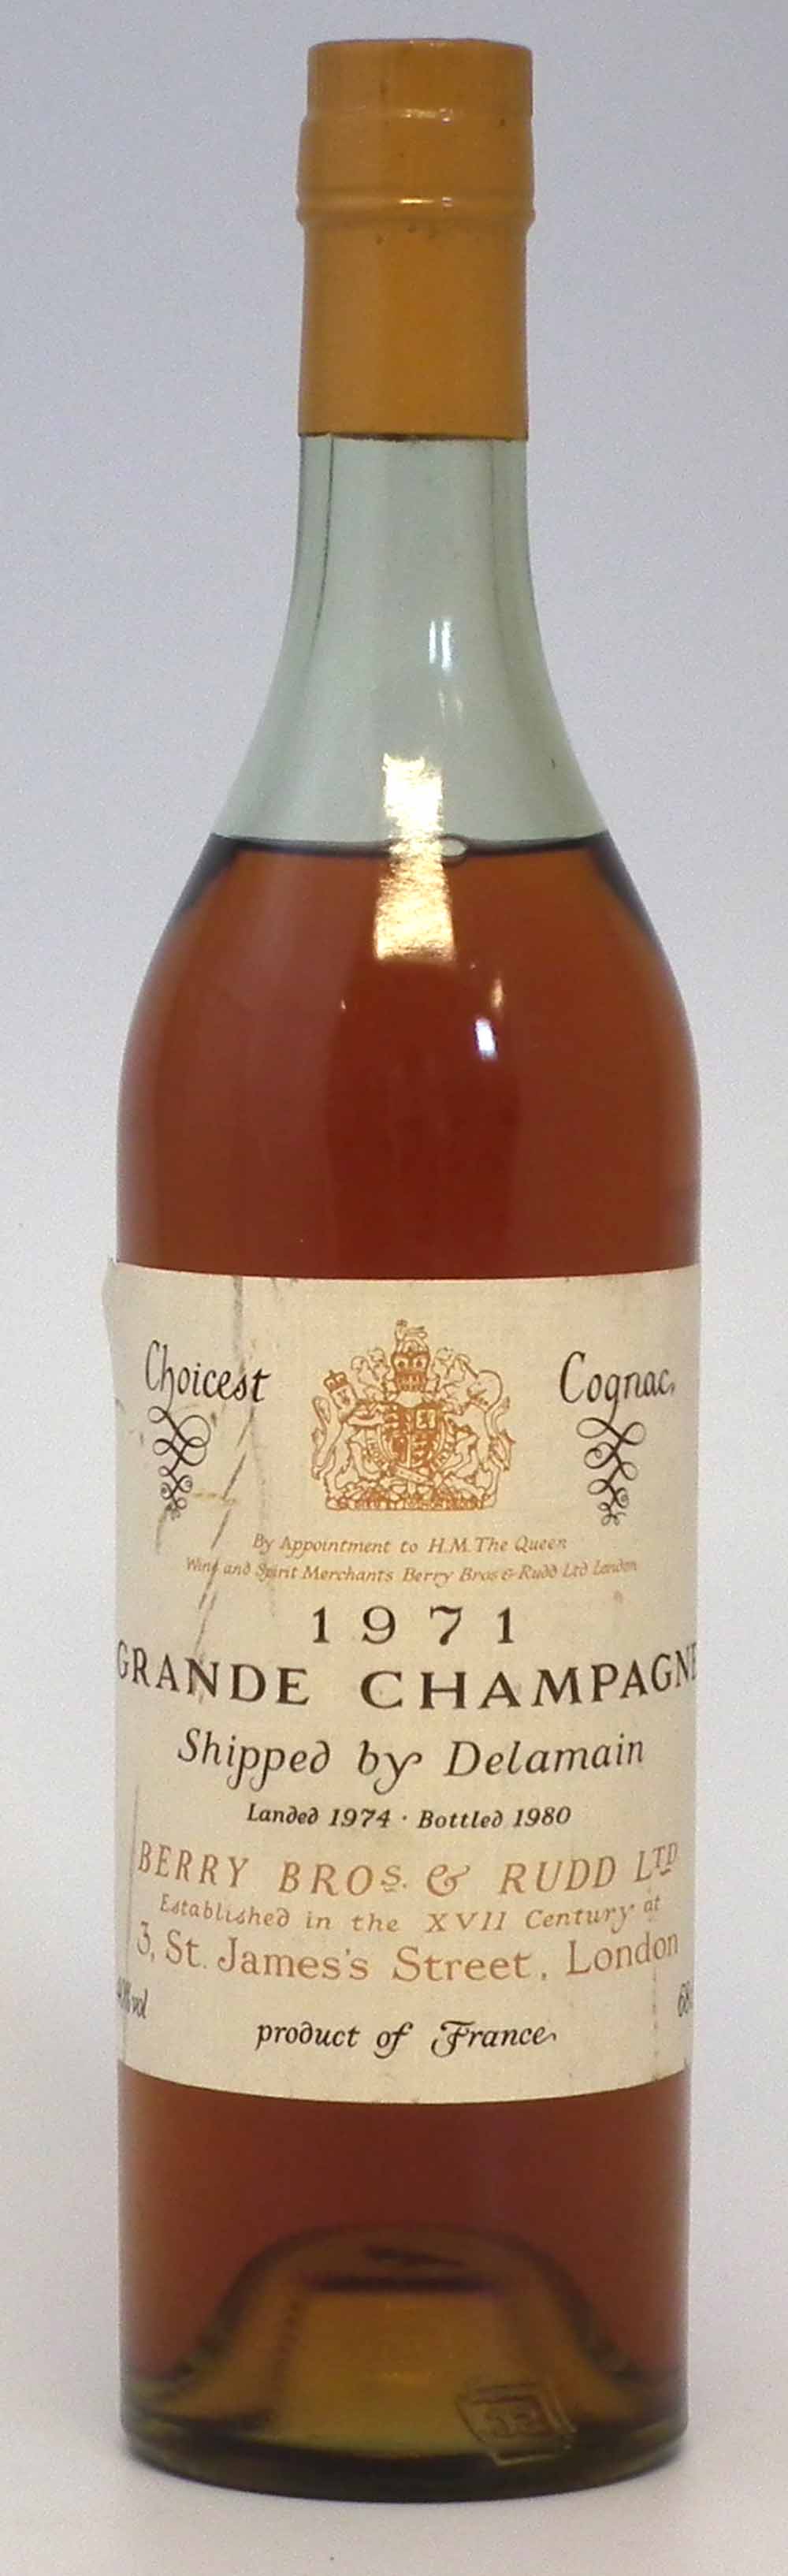 Grande Champagne Choicest Cognac 1971, 1 bottle, shipped by Delamain. (1)     Condition report: